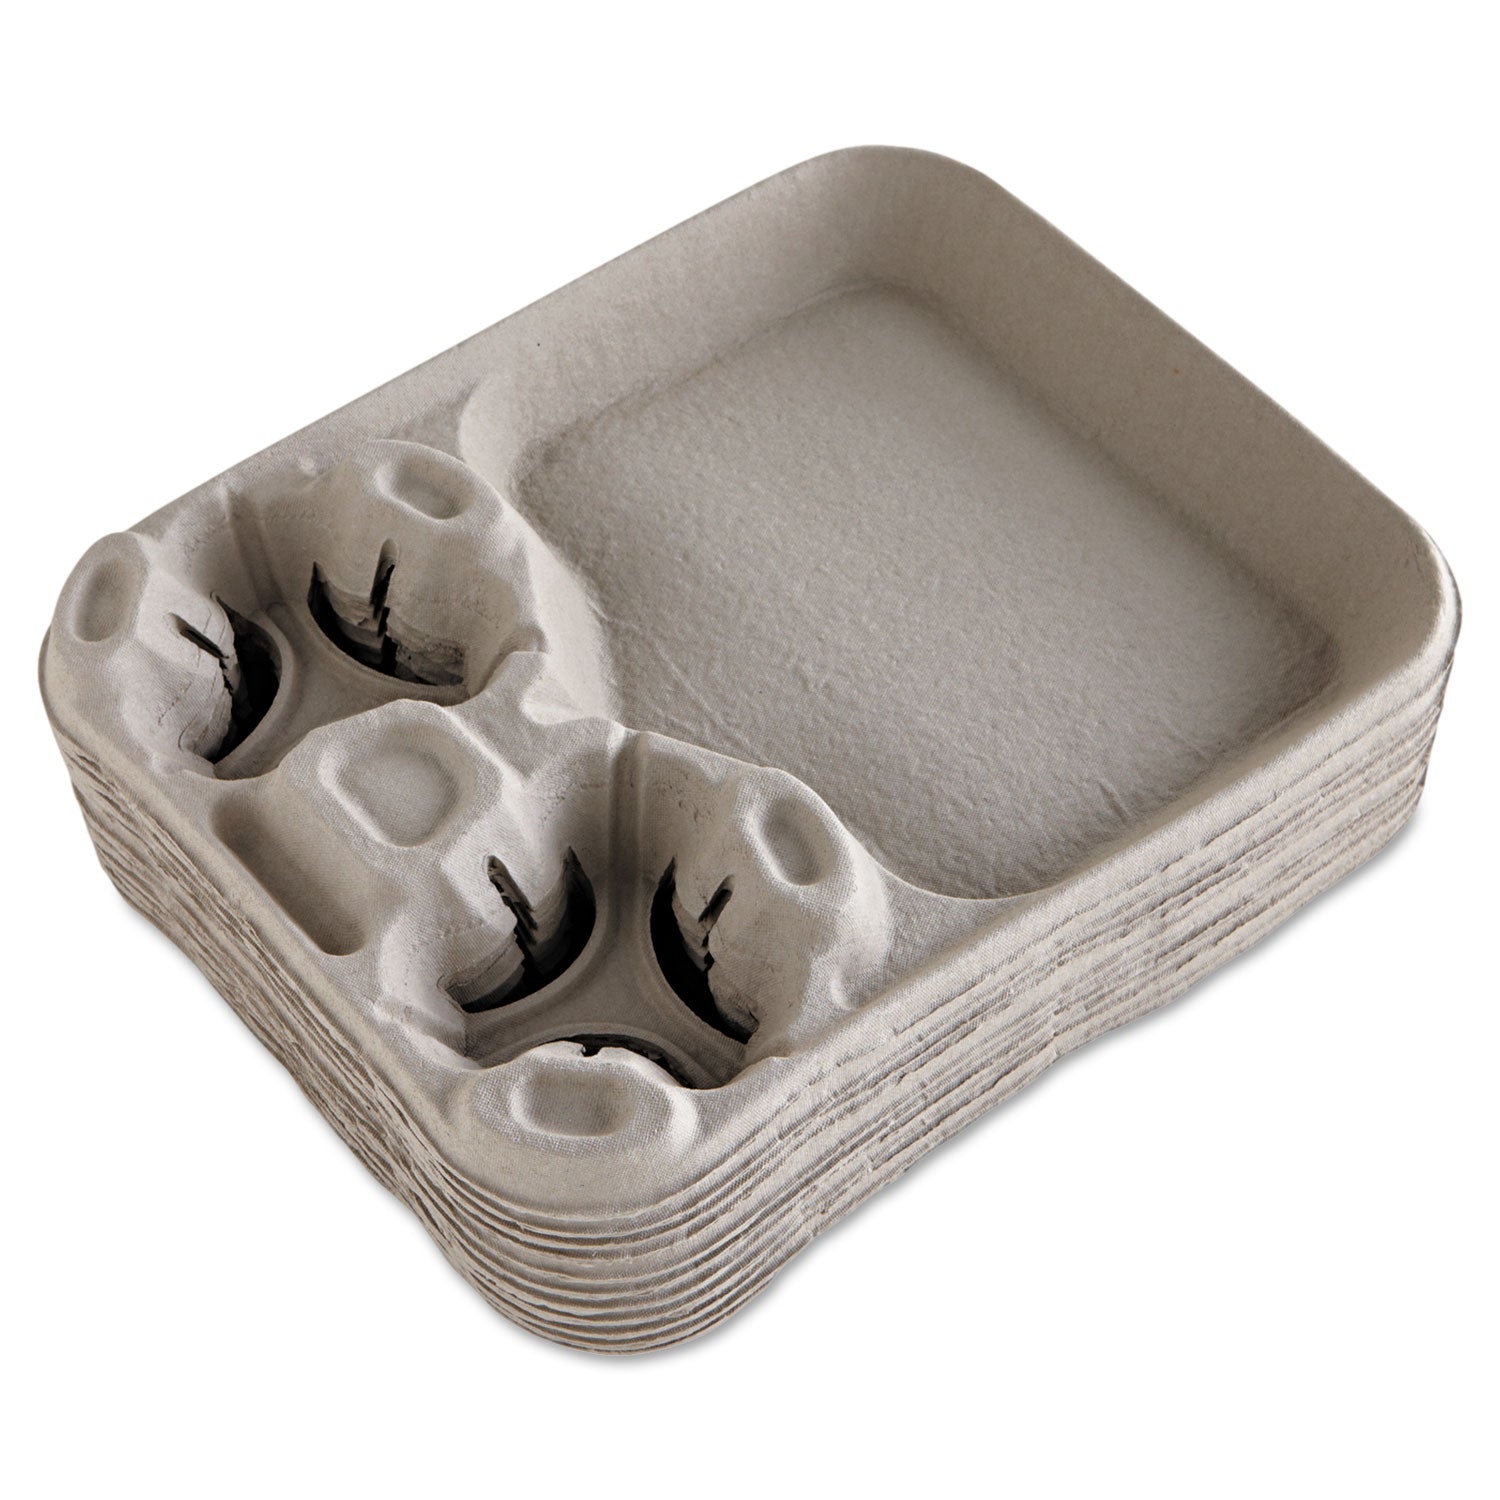 strongholder-molded-fiber-cup-food-trays-8-oz-to-44-oz-2-cups-beige-100-carton_huh20990ct - 2